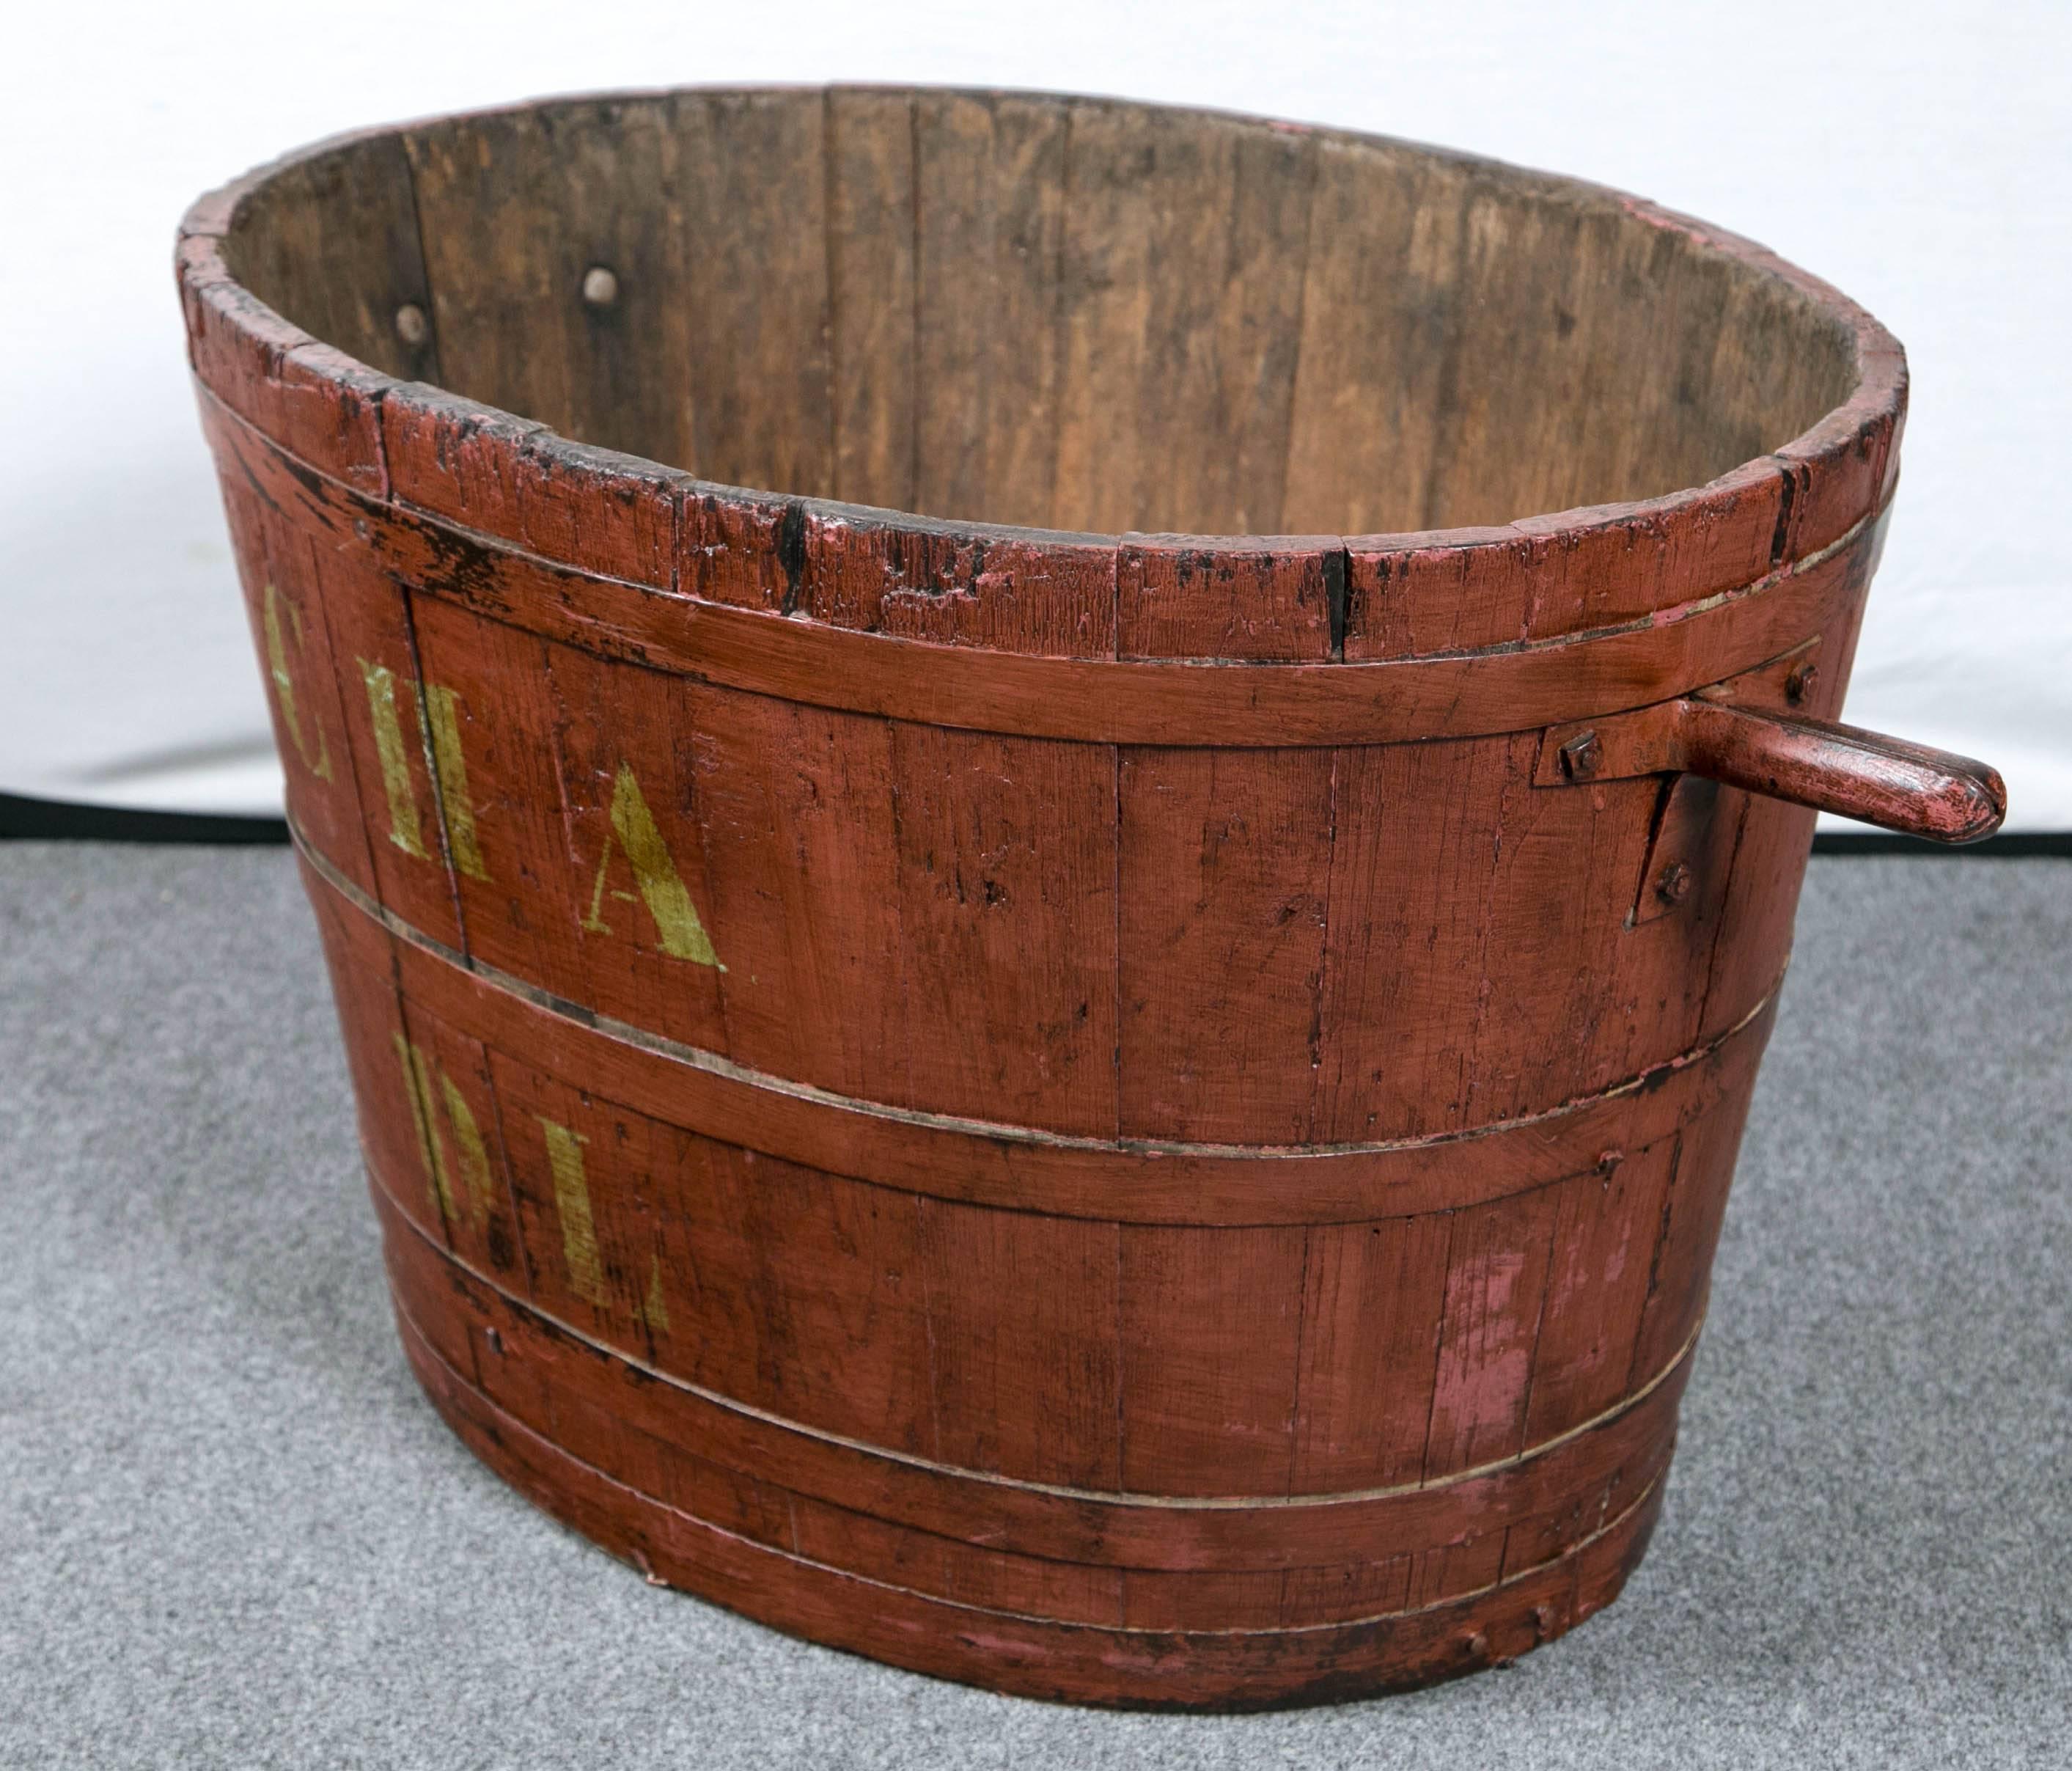 From the vineyards of France, a charming wooden staved bucket with iron handles and rings. This was used to gather grapes. The iron handles would be hooked onto wheeled carts. Stenciled letters 